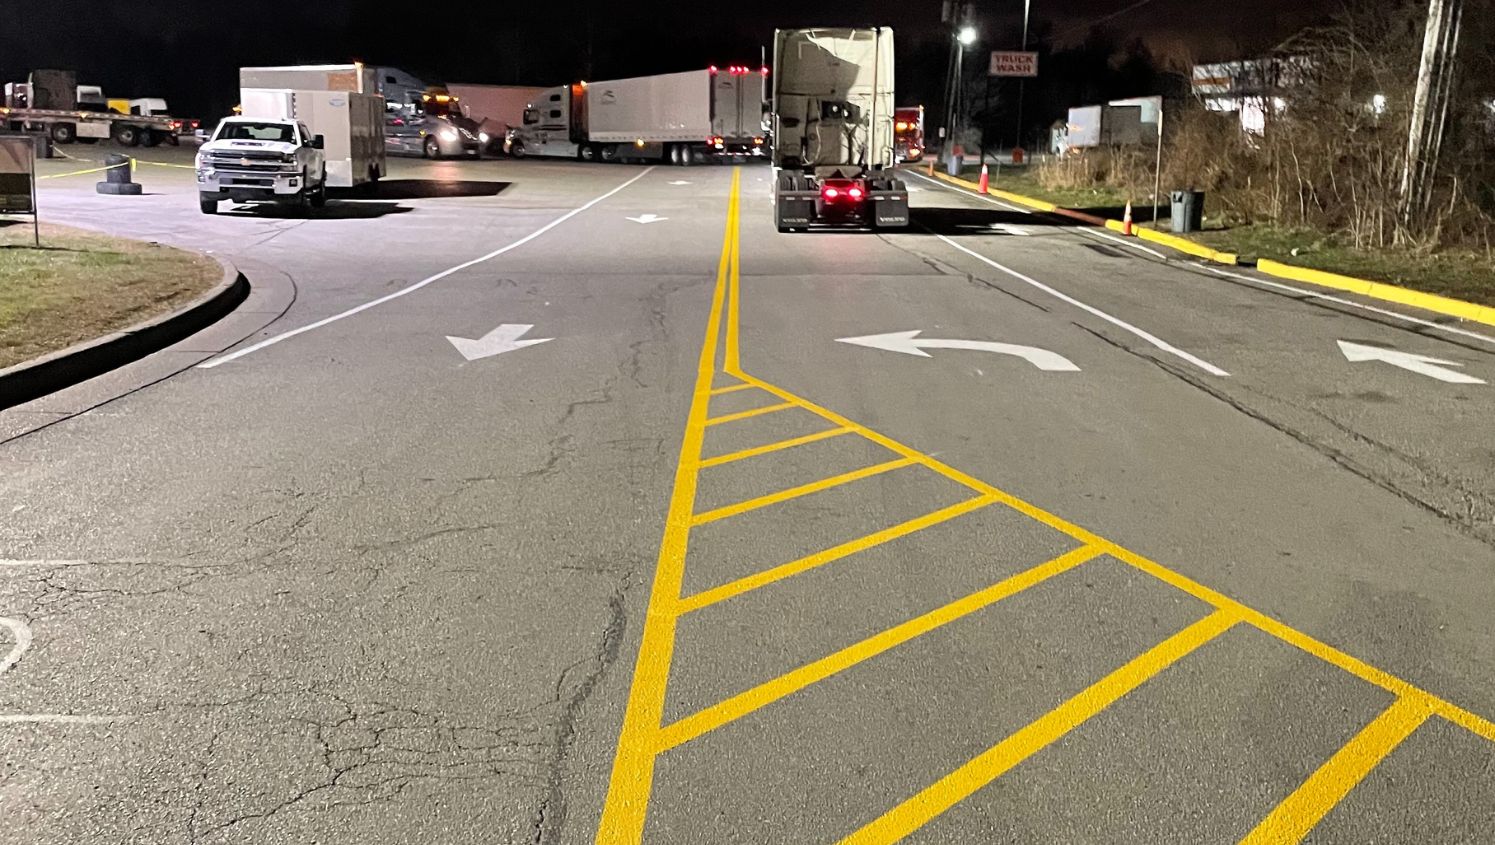 new parking lot striping